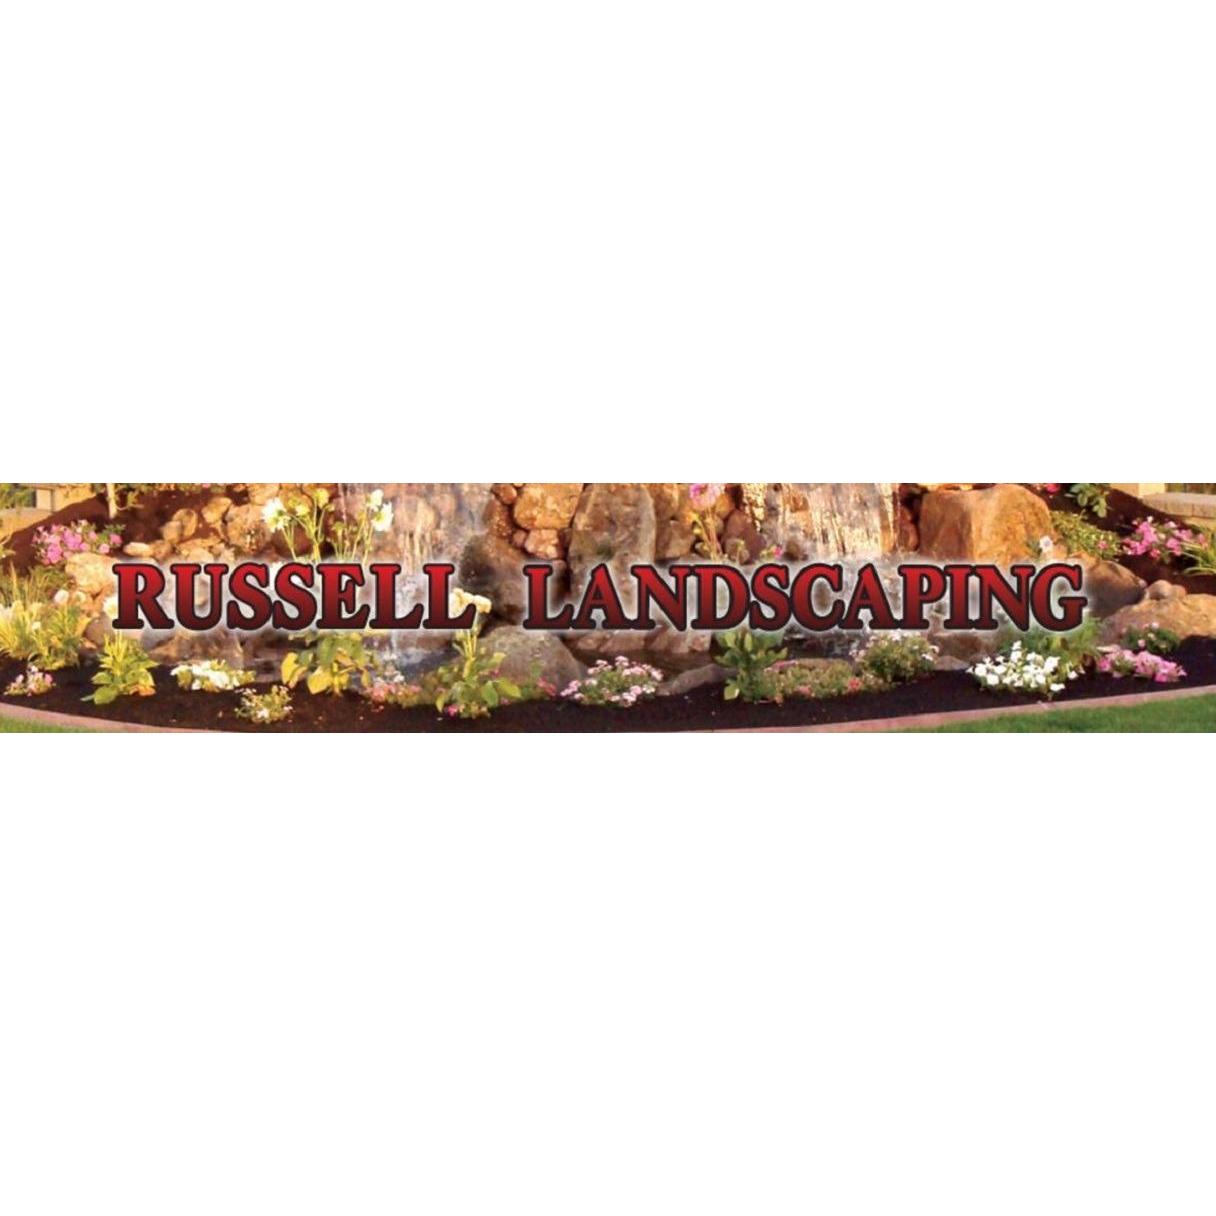 Russell Landscaping, LLC